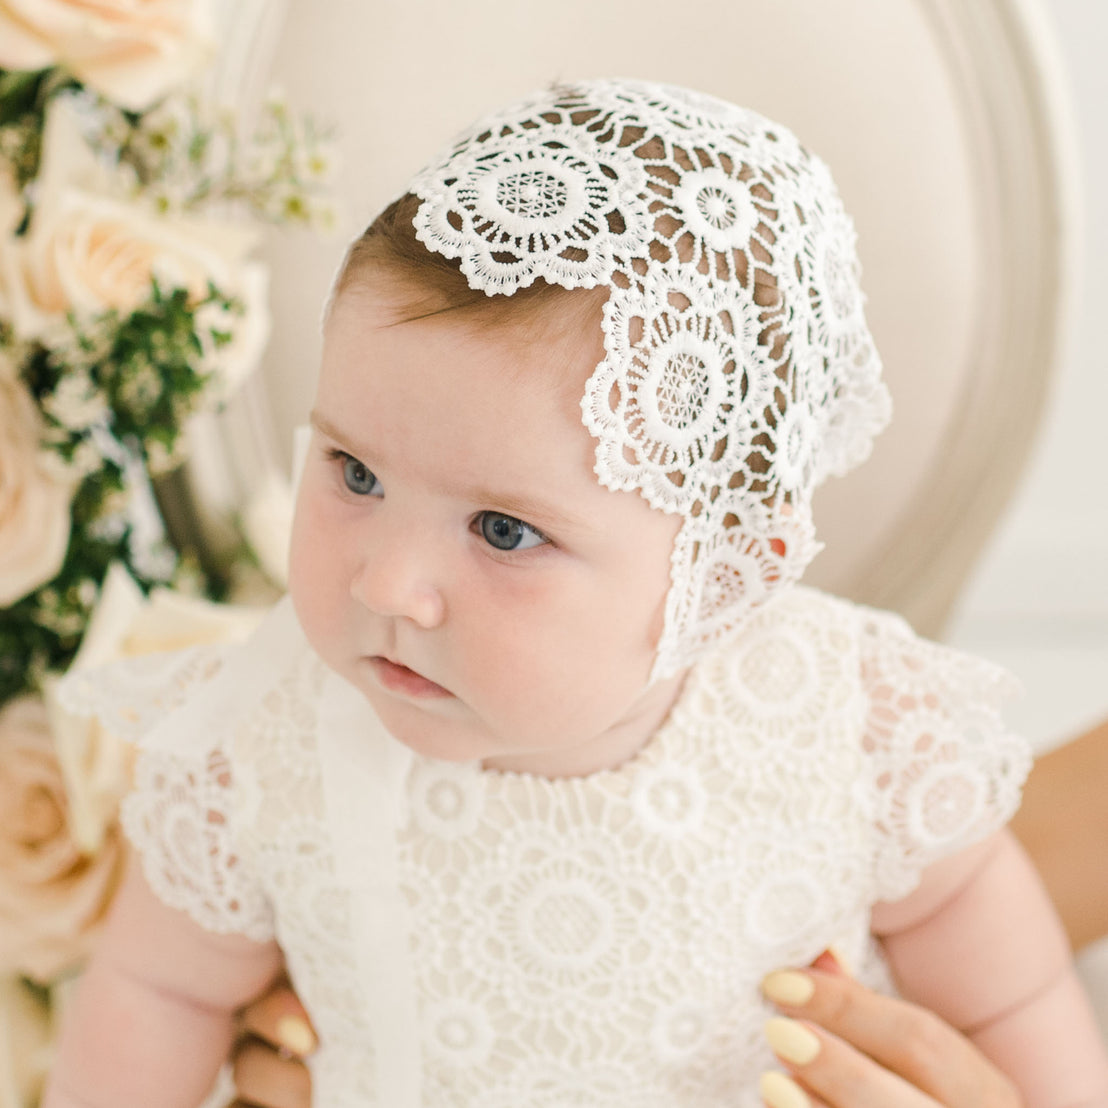 Close up detail of baby girl wearing a lace blessing bonnet.